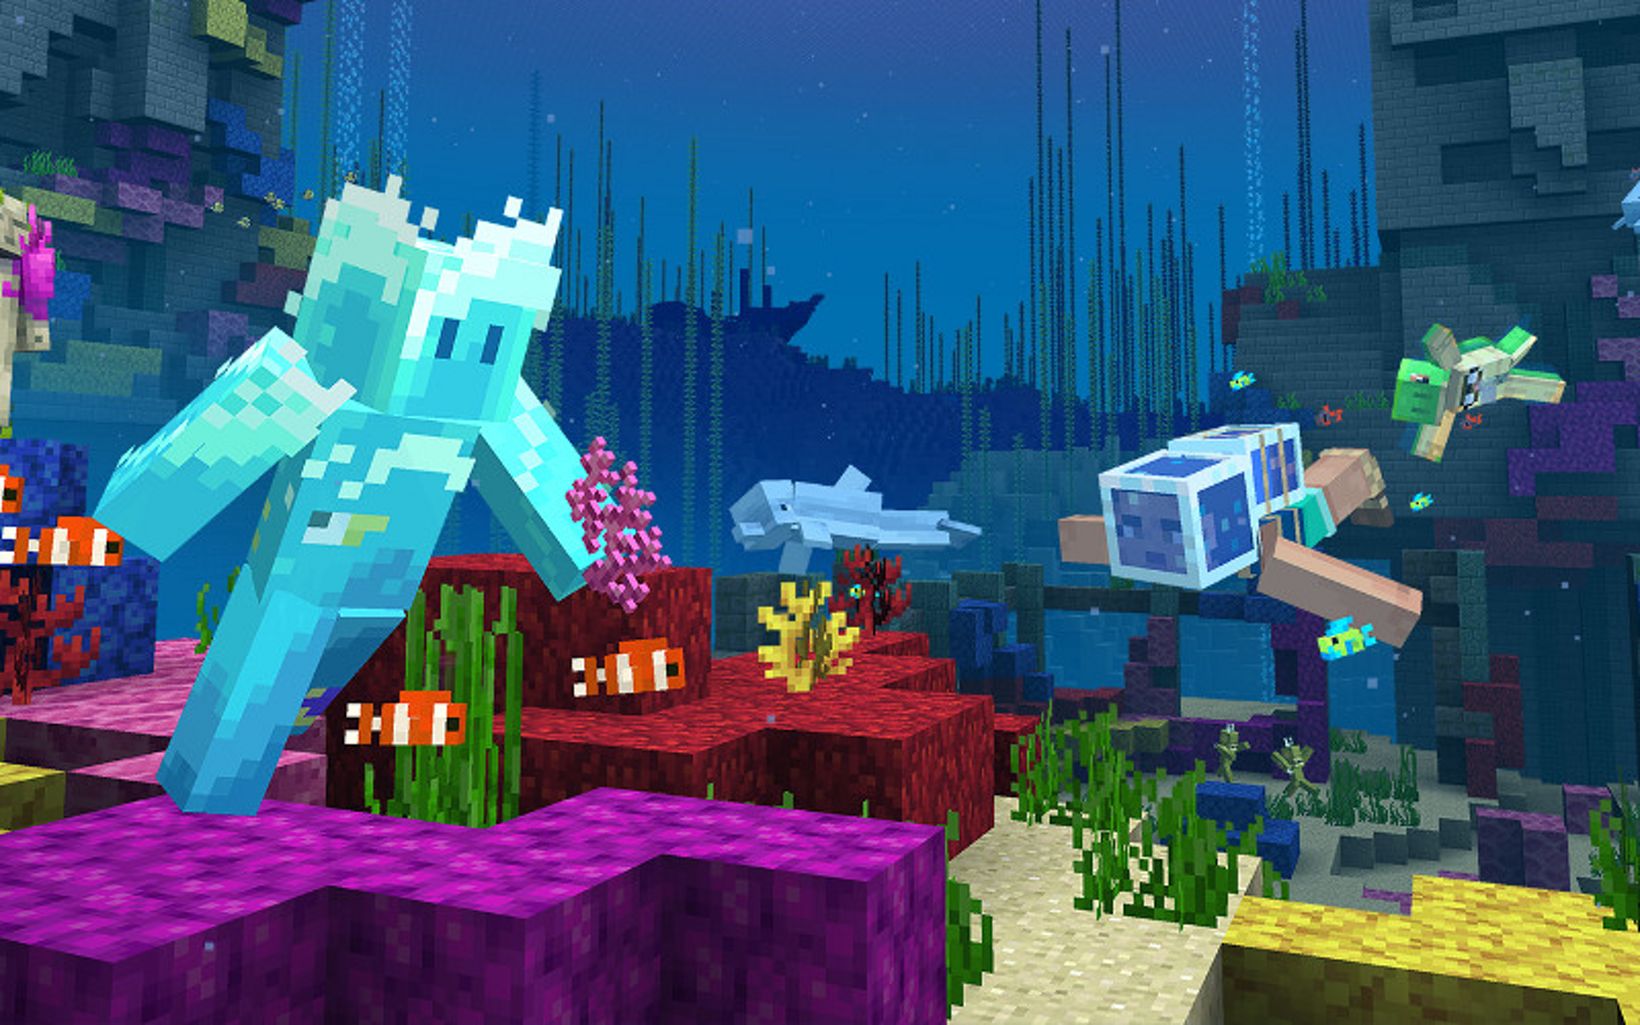 play MINECRAFT! Project by Fluorescent Eucalyptus